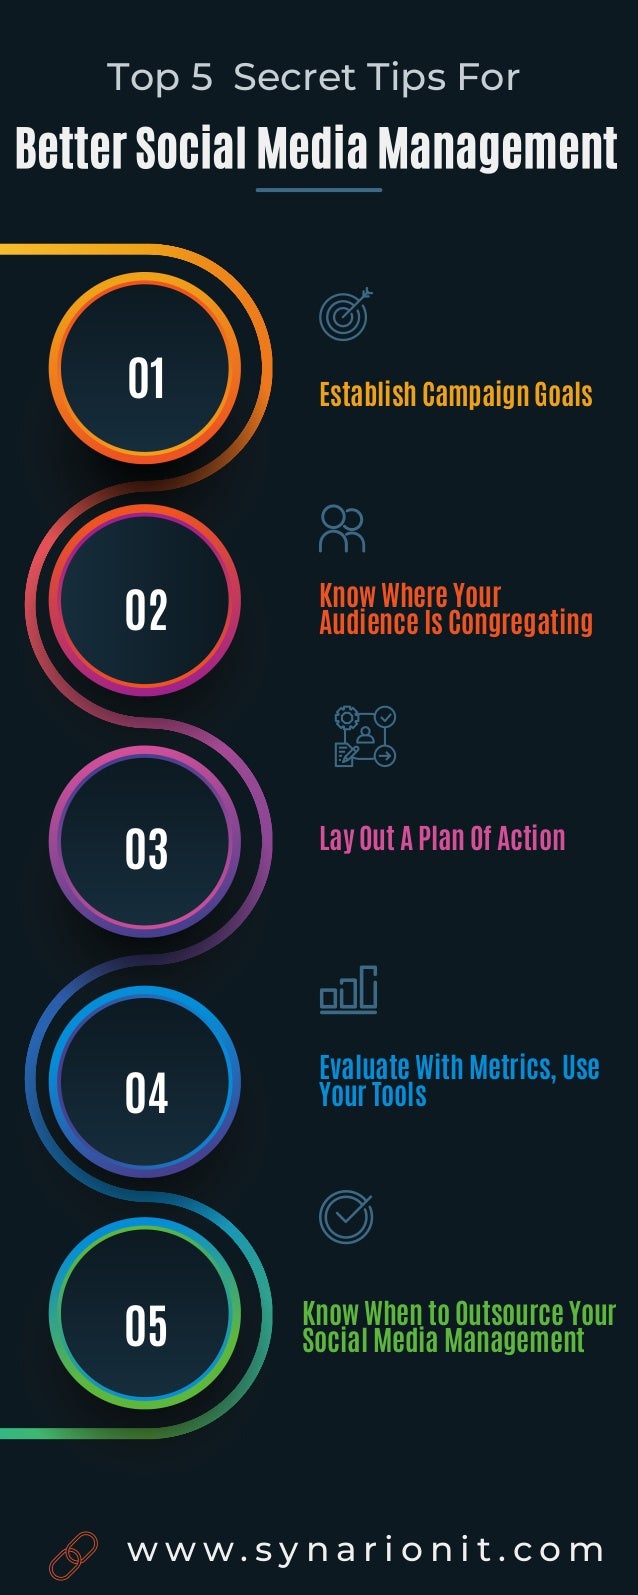 01
02
03
04
05
Establish Campaign Goals
Lay Out A Plan Of Action
Know When to Outsource Your
Social Media Management
Know Where Your
Audience Is Congregating
Evaluate With Metrics, Use
Your Tools
Top 5 Secret Tips For
Better Social Media Management
w w w . s y n a r i o n i t . c o m
 